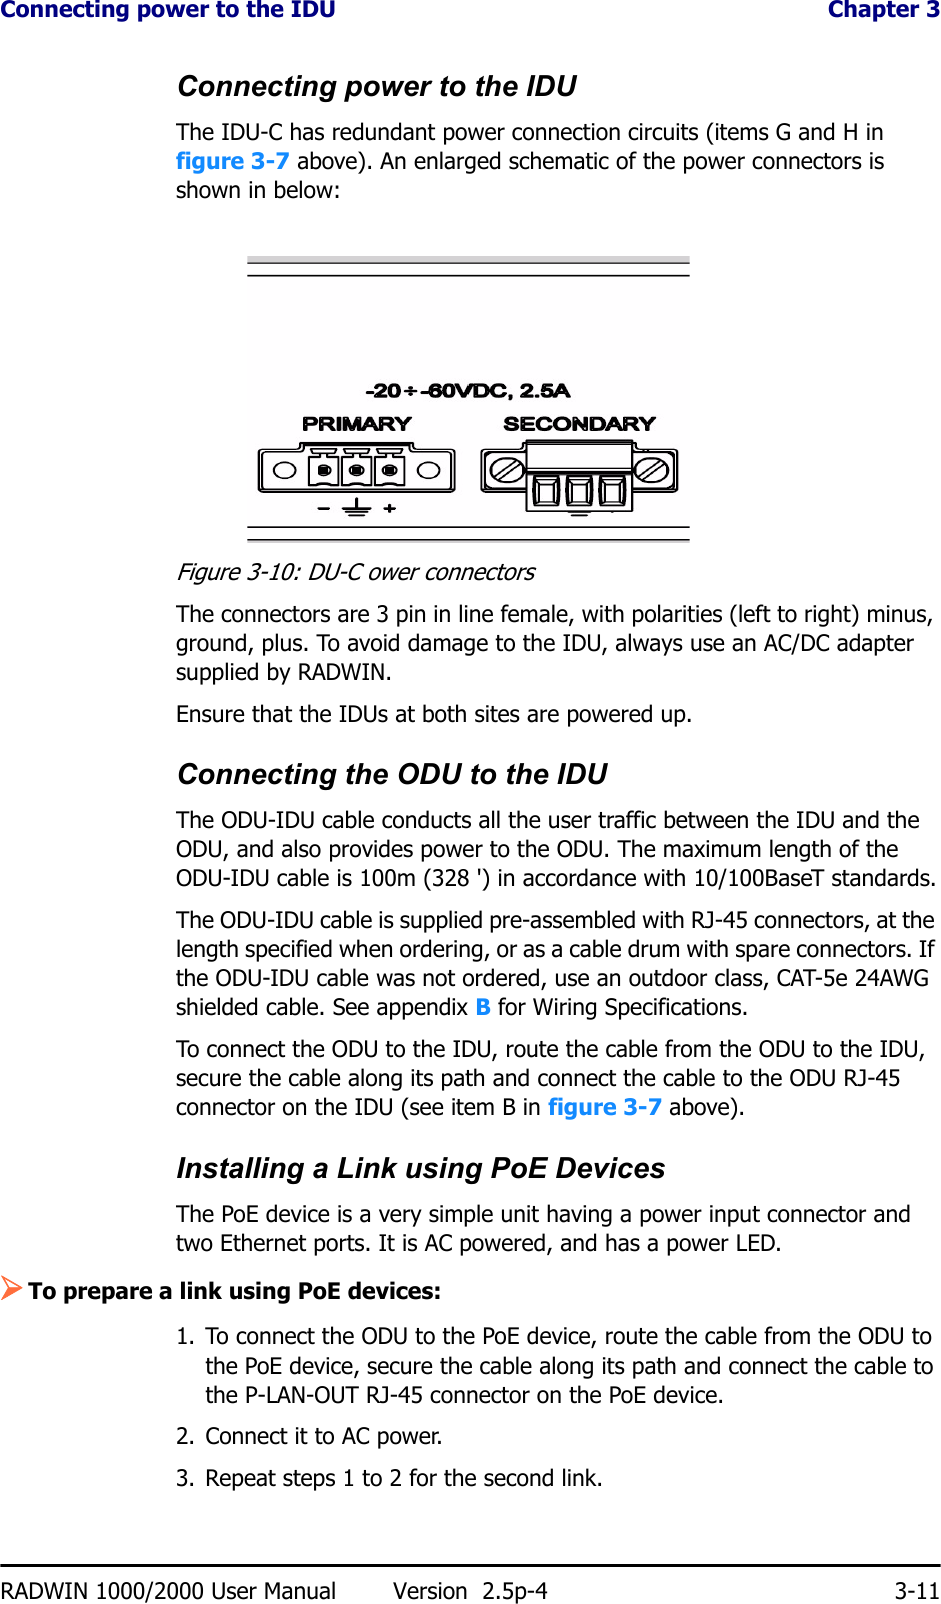 Connecting power to the IDU  Chapter 3RADWIN 1000/2000 User Manual Version  2.5p-4 3-11Connecting power to the IDUThe IDU-C has redundant power connection circuits (items G and H in figure 3-7 above). An enlarged schematic of the power connectors is shown in below:Figure 3-10: DU-C ower connectorsThe connectors are 3 pin in line female, with polarities (left to right) minus, ground, plus. To avoid damage to the IDU, always use an AC/DC adapter supplied by RADWIN.Ensure that the IDUs at both sites are powered up.Connecting the ODU to the IDUThe ODU-IDU cable conducts all the user traffic between the IDU and the ODU, and also provides power to the ODU. The maximum length of the ODU-IDU cable is 100m (328 &apos;) in accordance with 10/100BaseT standards.The ODU-IDU cable is supplied pre-assembled with RJ-45 connectors, at the length specified when ordering, or as a cable drum with spare connectors. If the ODU-IDU cable was not ordered, use an outdoor class, CAT-5e 24AWG shielded cable. See appendix B for Wiring Specifications.To connect the ODU to the IDU, route the cable from the ODU to the IDU, secure the cable along its path and connect the cable to the ODU RJ-45 connector on the IDU (see item B in figure 3-7 above).Installing a Link using PoE DevicesThe PoE device is a very simple unit having a power input connector and two Ethernet ports. It is AC powered, and has a power LED.¾To prepare a link using PoE devices:1. To connect the ODU to the PoE device, route the cable from the ODU to the PoE device, secure the cable along its path and connect the cable to the P-LAN-OUT RJ-45 connector on the PoE device.2. Connect it to AC power.3. Repeat steps 1 to 2 for the second link.